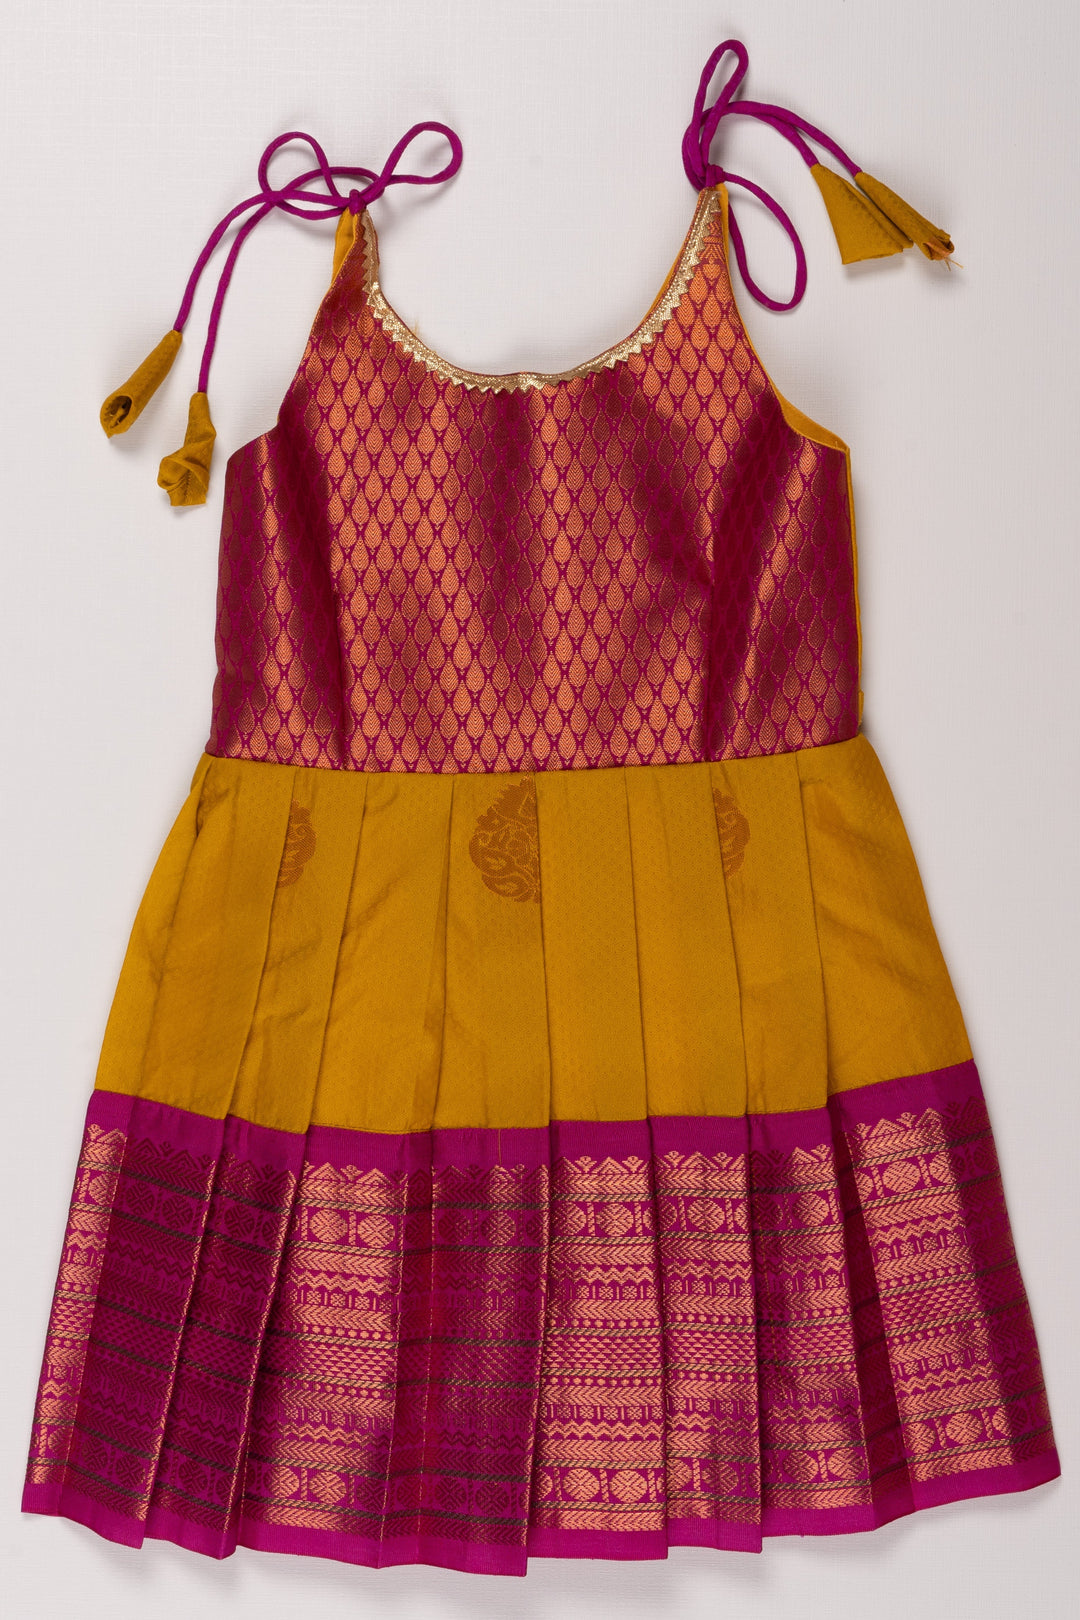 The Nesavu Tie Up Frock Elegant Magenta and Yellow Silk Blend TieUp Frock with Intricate Gold Border Detailing Nesavu 14 (6M) / Yellow / Style 1 T338A-14 Magenta and Yellow Silk Frock | Ethnic Party Dress with Gold Detailing | The Nesavu